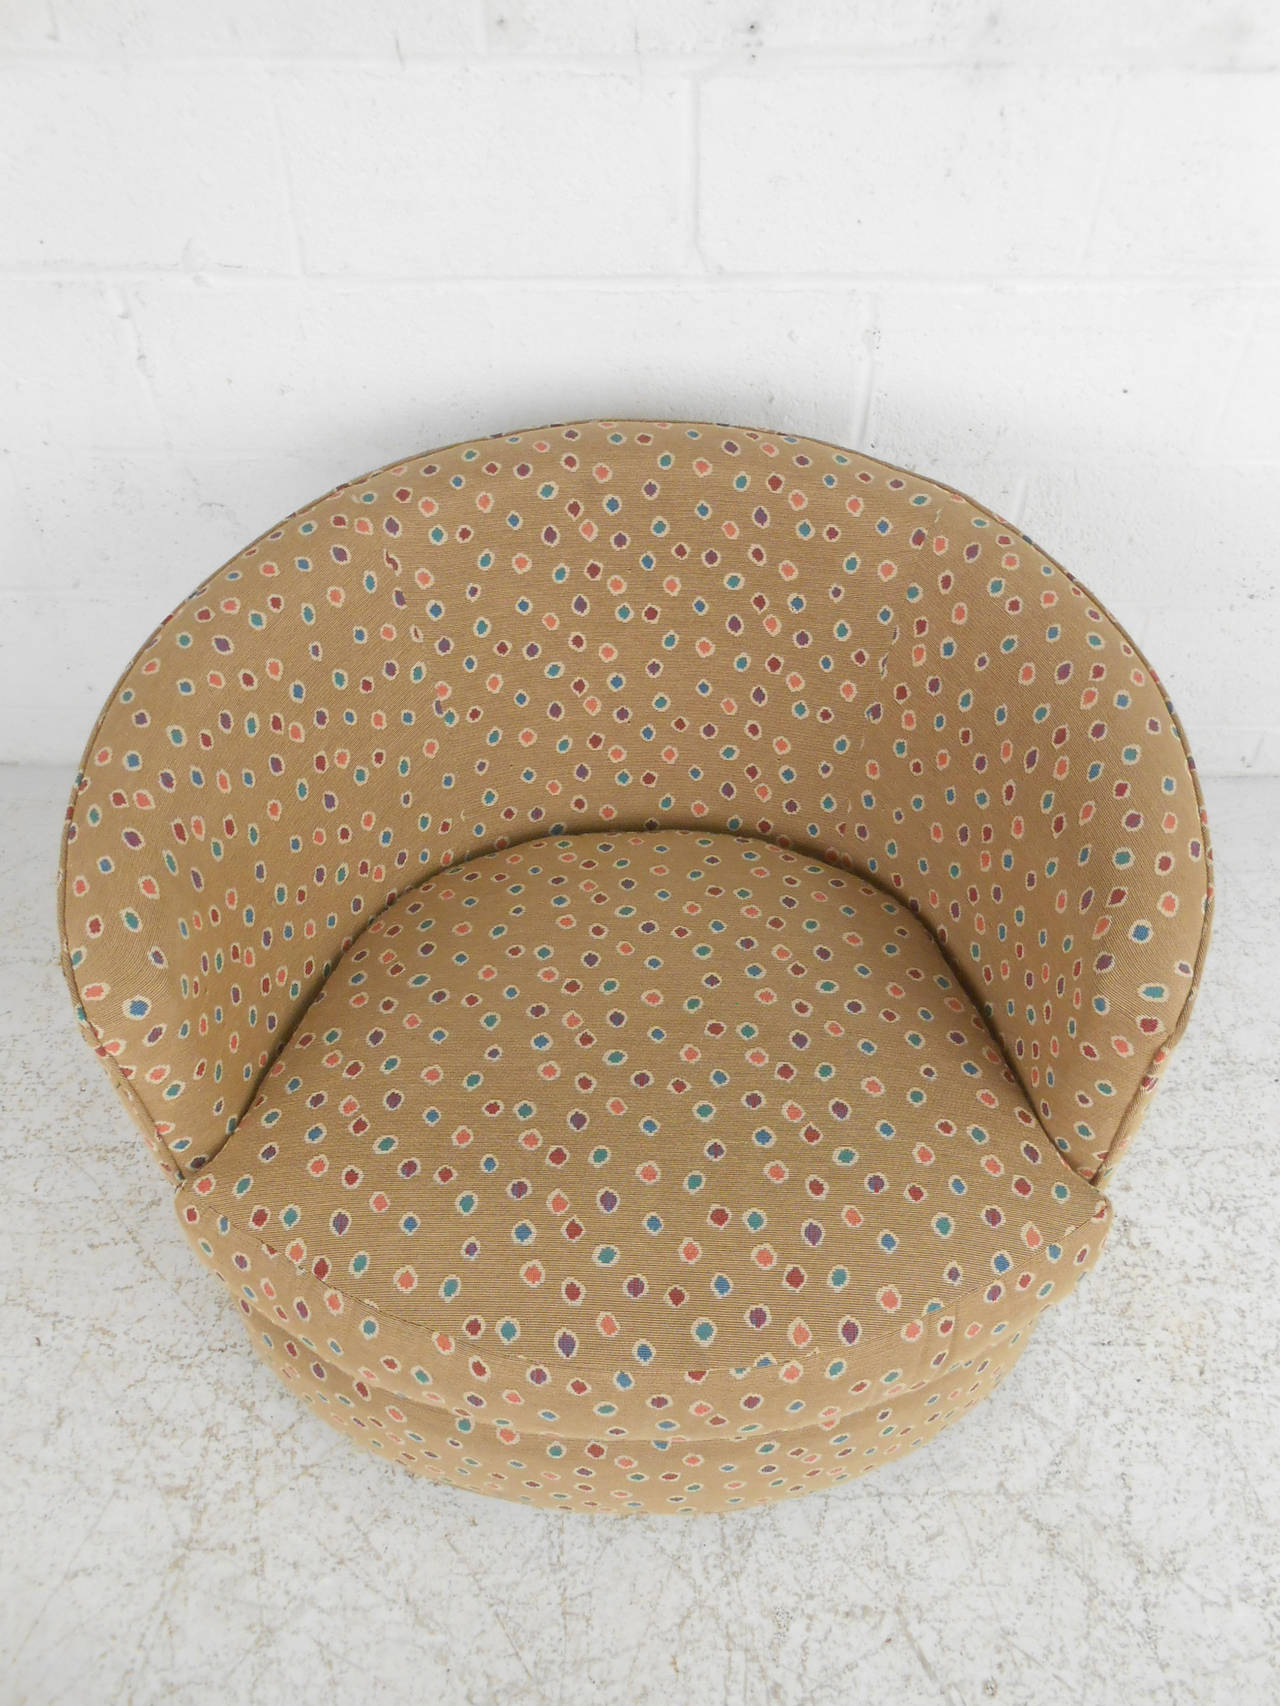 This midcentury style chair features comfortable barrel back design and swivel base. Fabric and upholstery are comfortable and clean. Please confirm item location (NY or NJ).